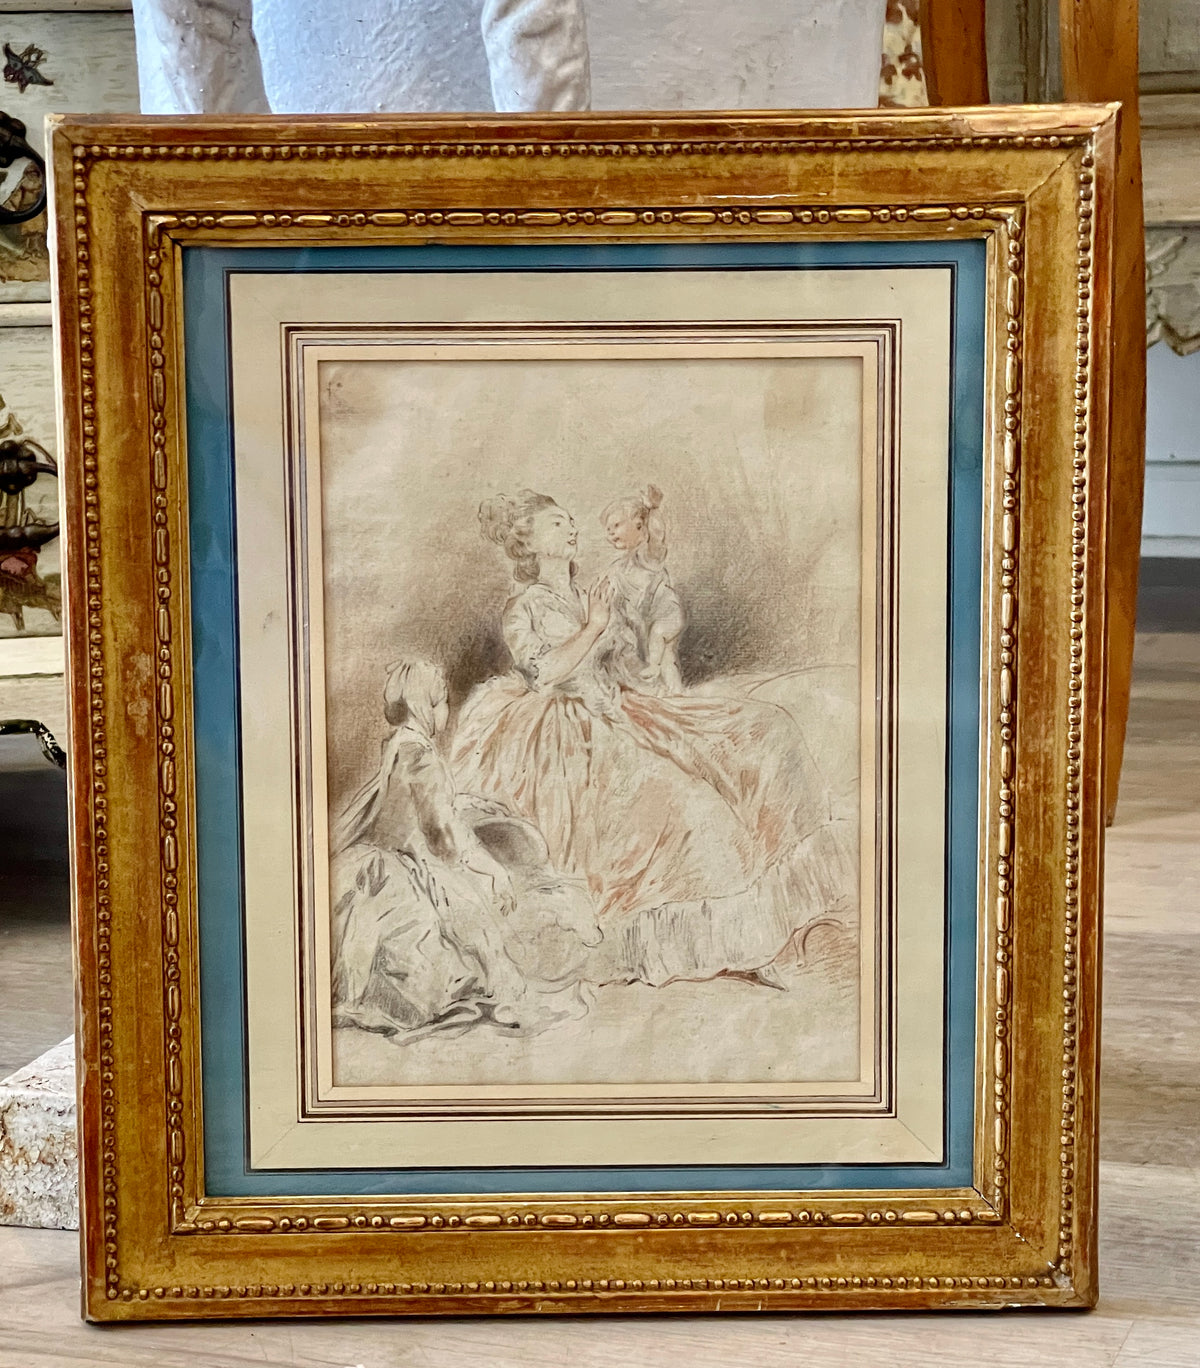 Sepia and Charcoal Sketch Attributed to Jean-Honore Fragonard